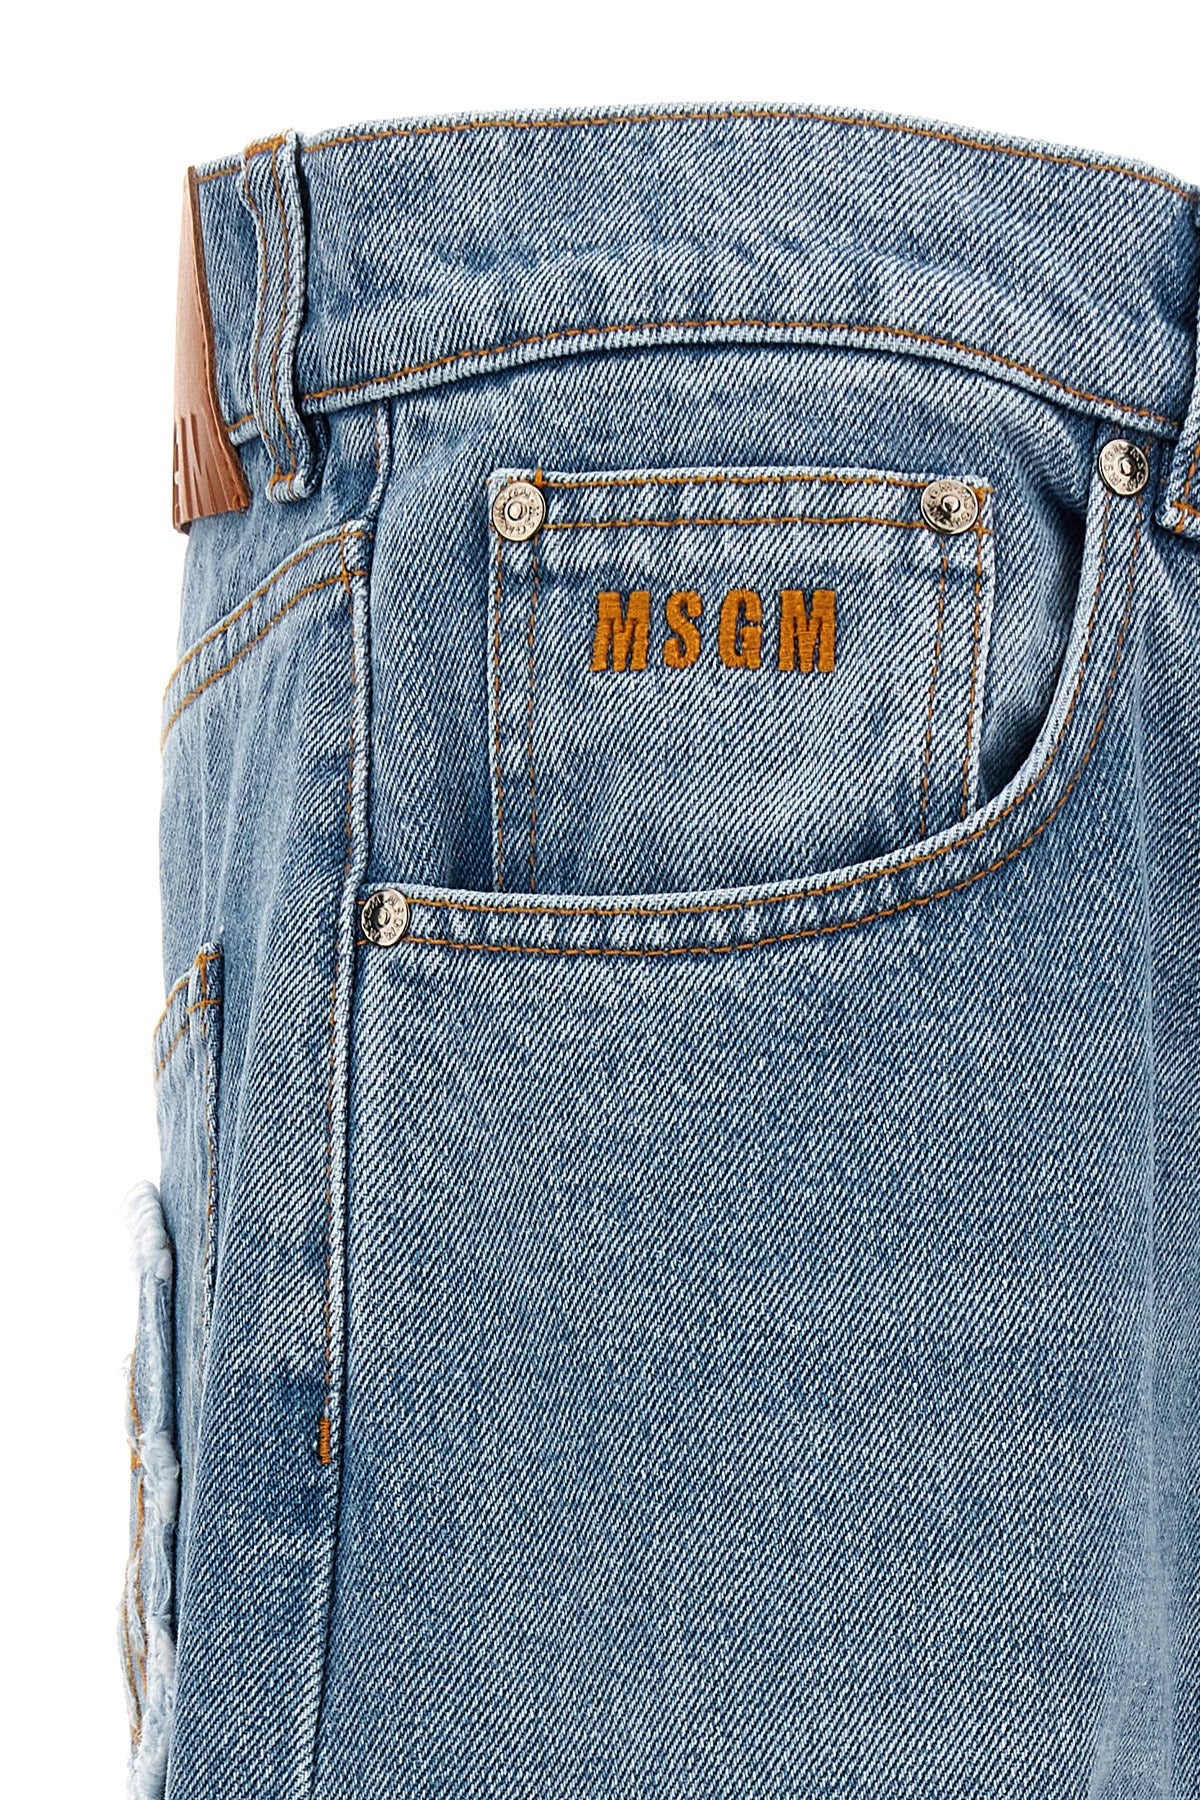 MSGM LOGO EMBROIDERY JEANS